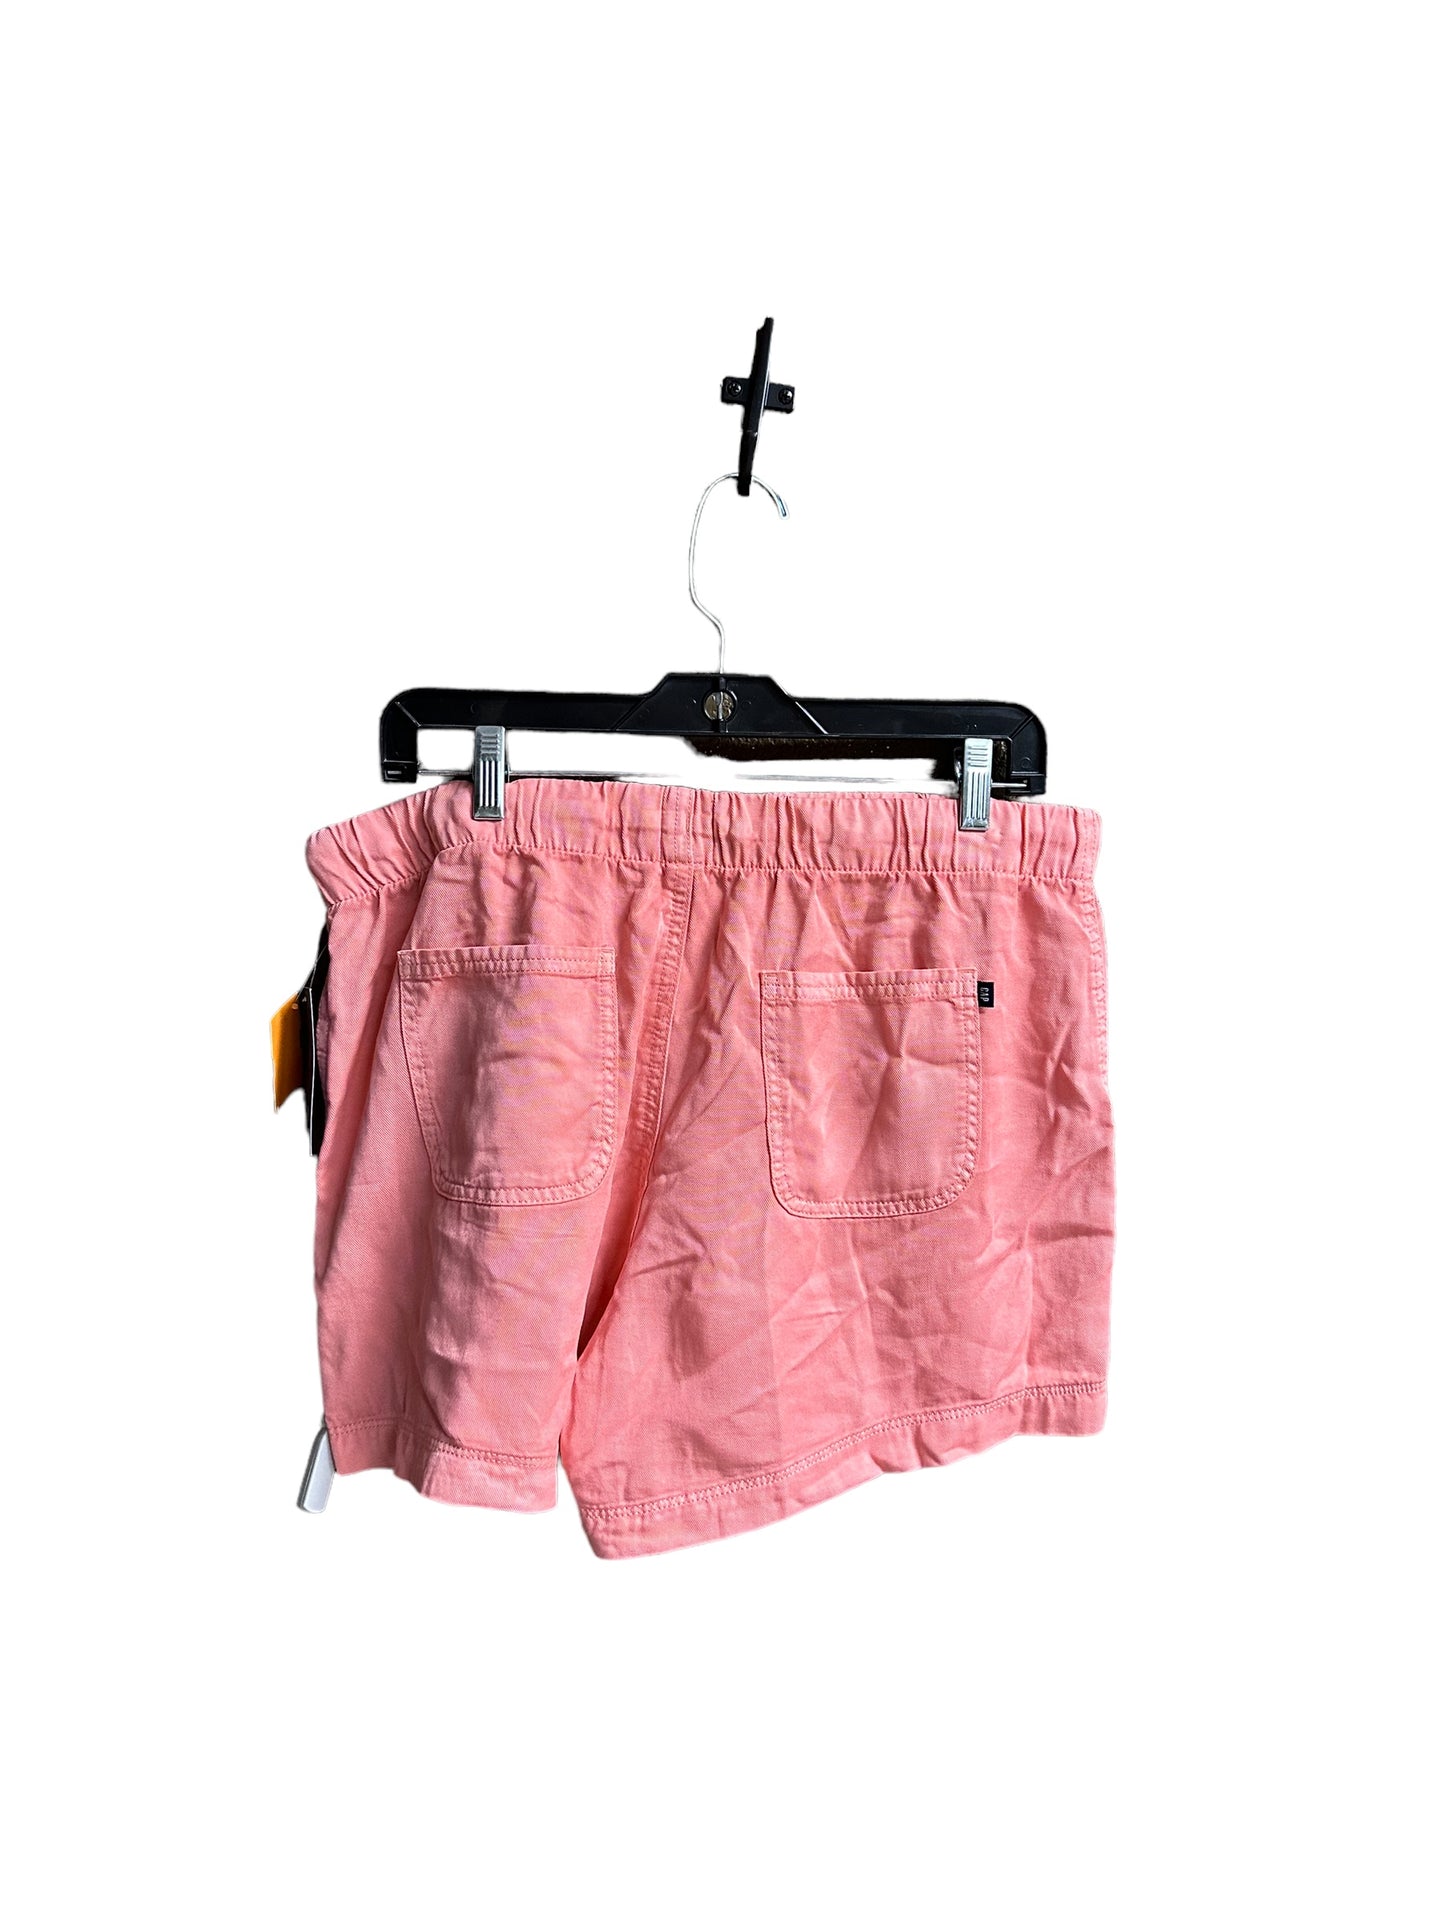 Shorts By Gap  Size: 8